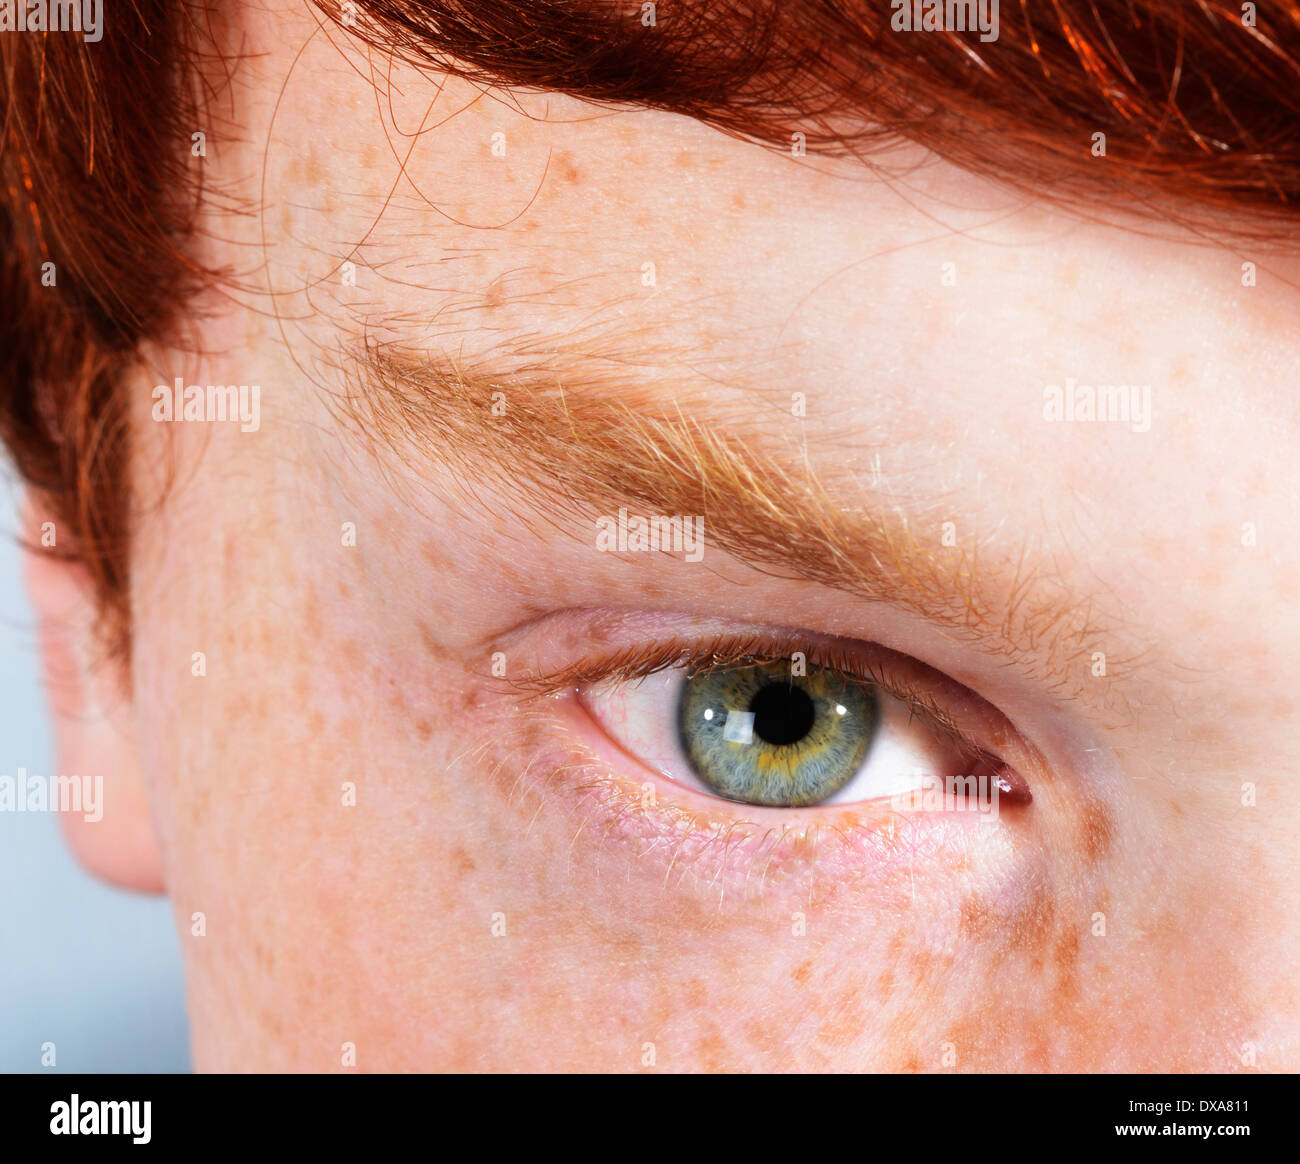 Eye of  young man with red hair, freckles and green eyes Stock Photo